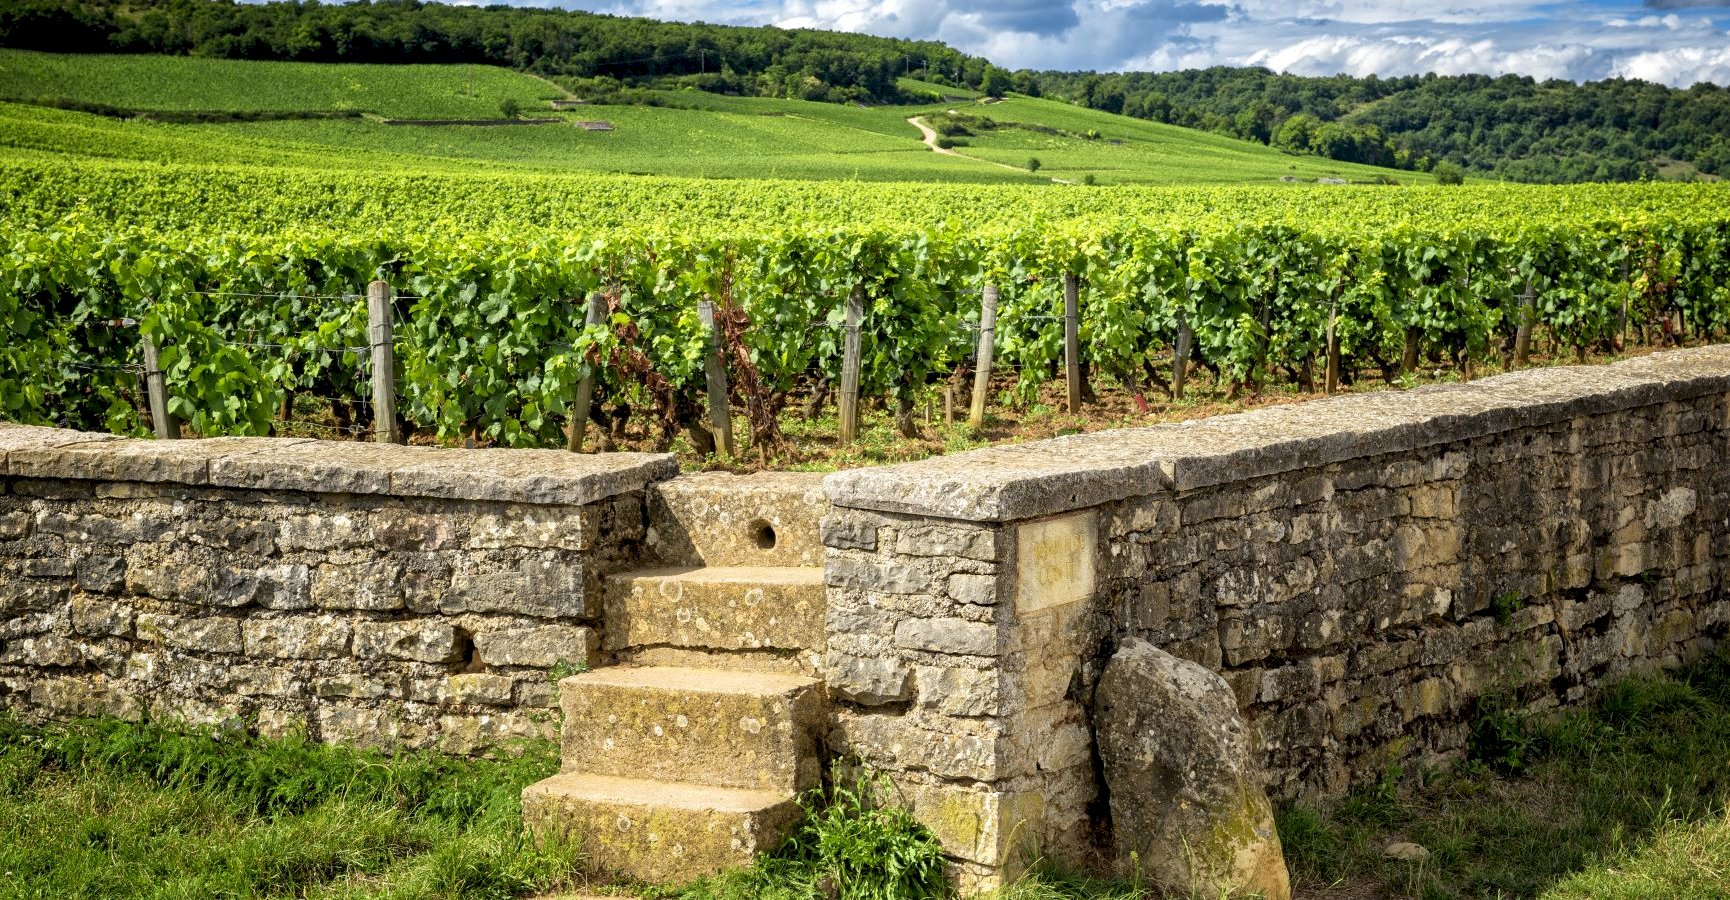 Ophorus Tours - 8 Days Private Alsace & Burgundy Travel Package - 3* Hotel